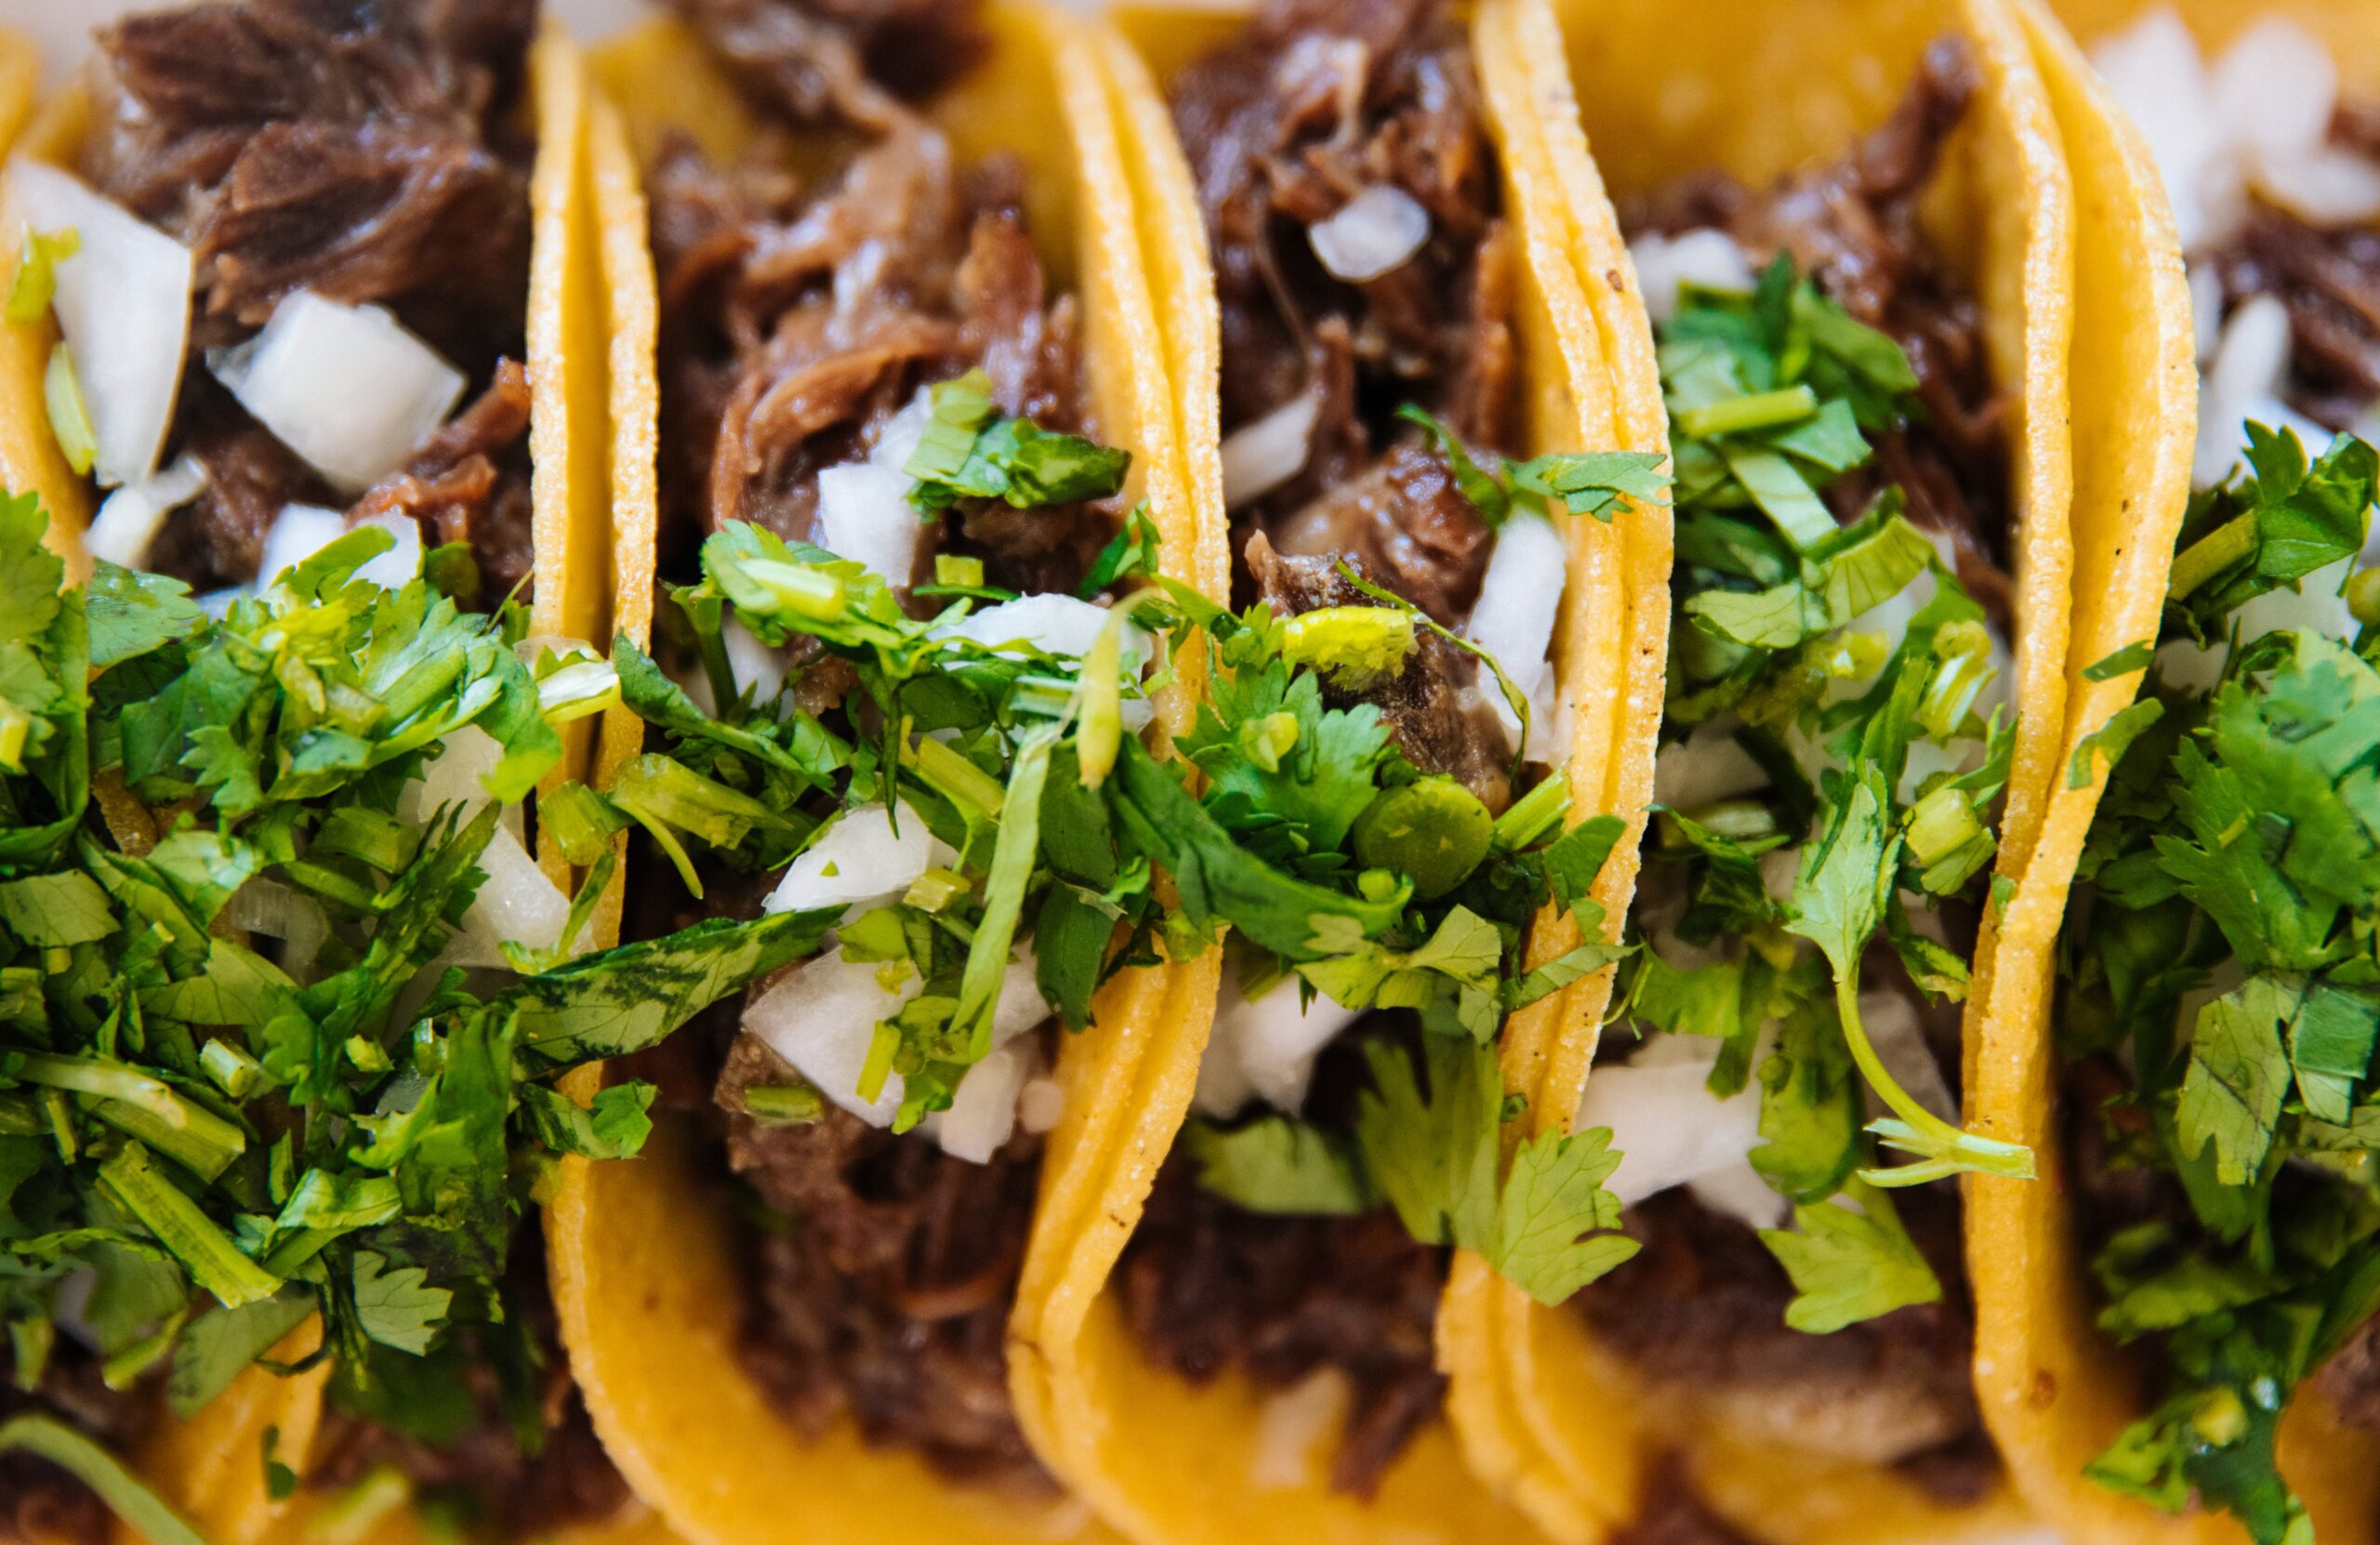 Photo by Jeswin Thomas: https://www.pexels.com/photo/mouthwatering-tacos-in-macro-shot-photography-5454019/